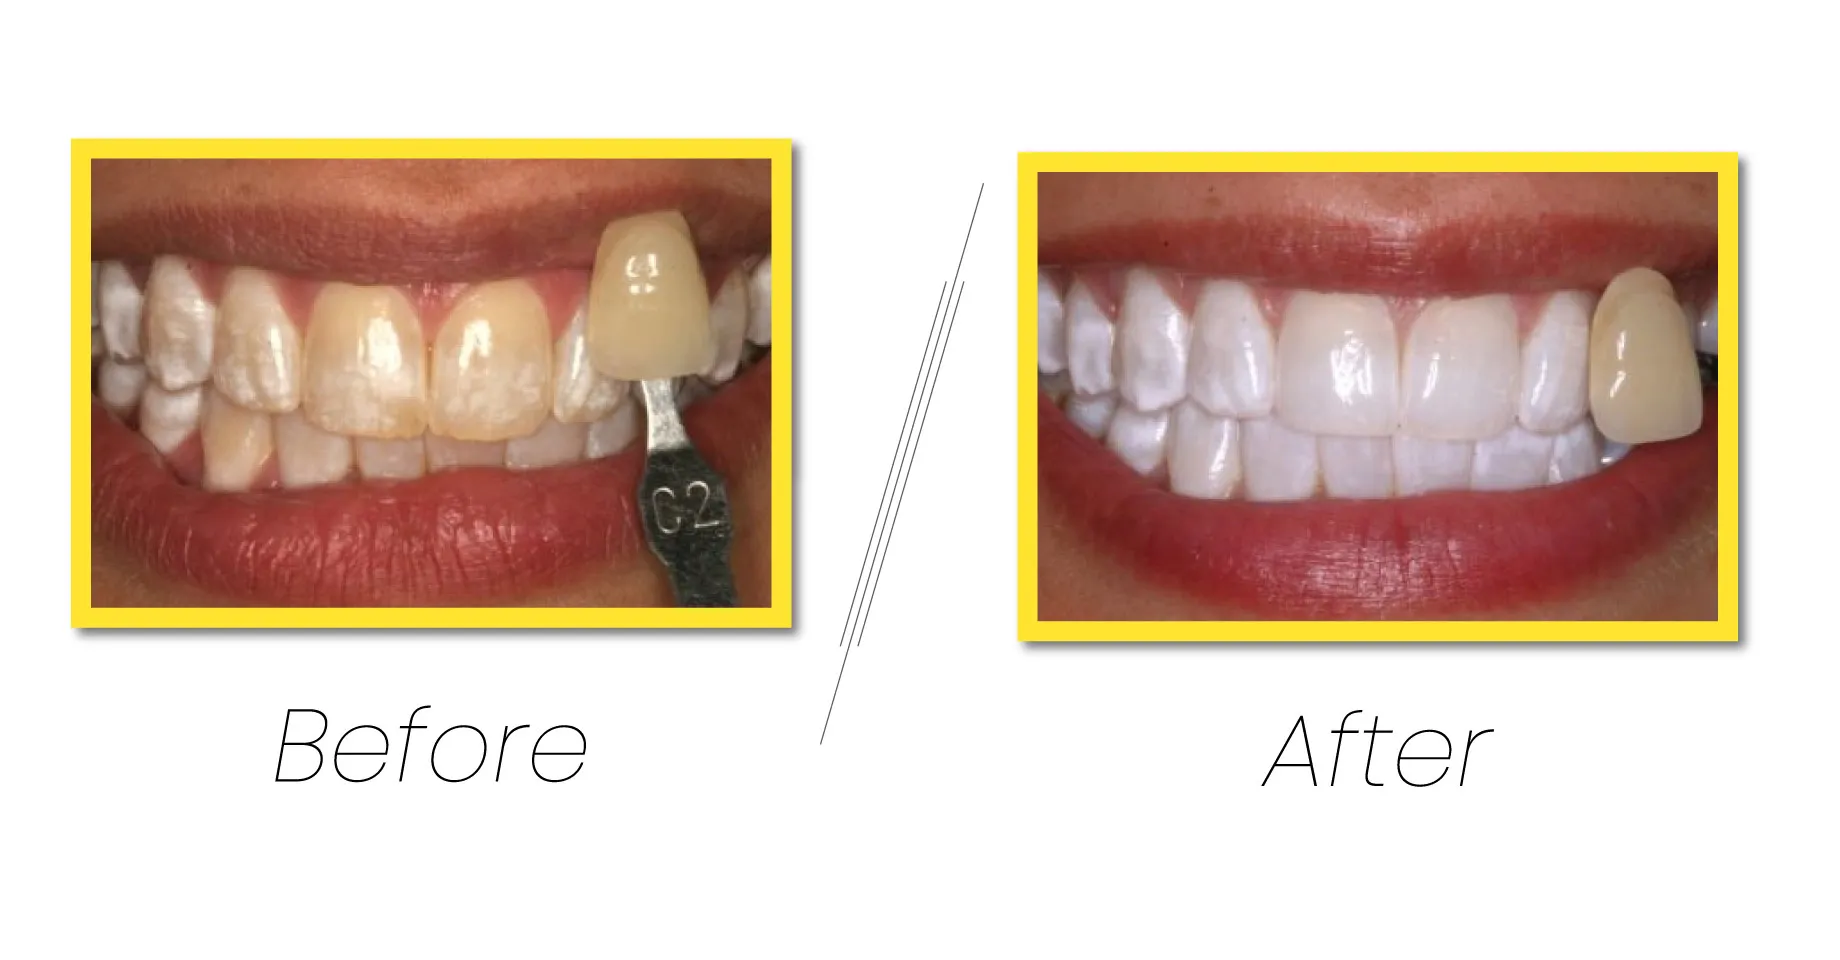 Best dental treatments procedure for your happy smile.